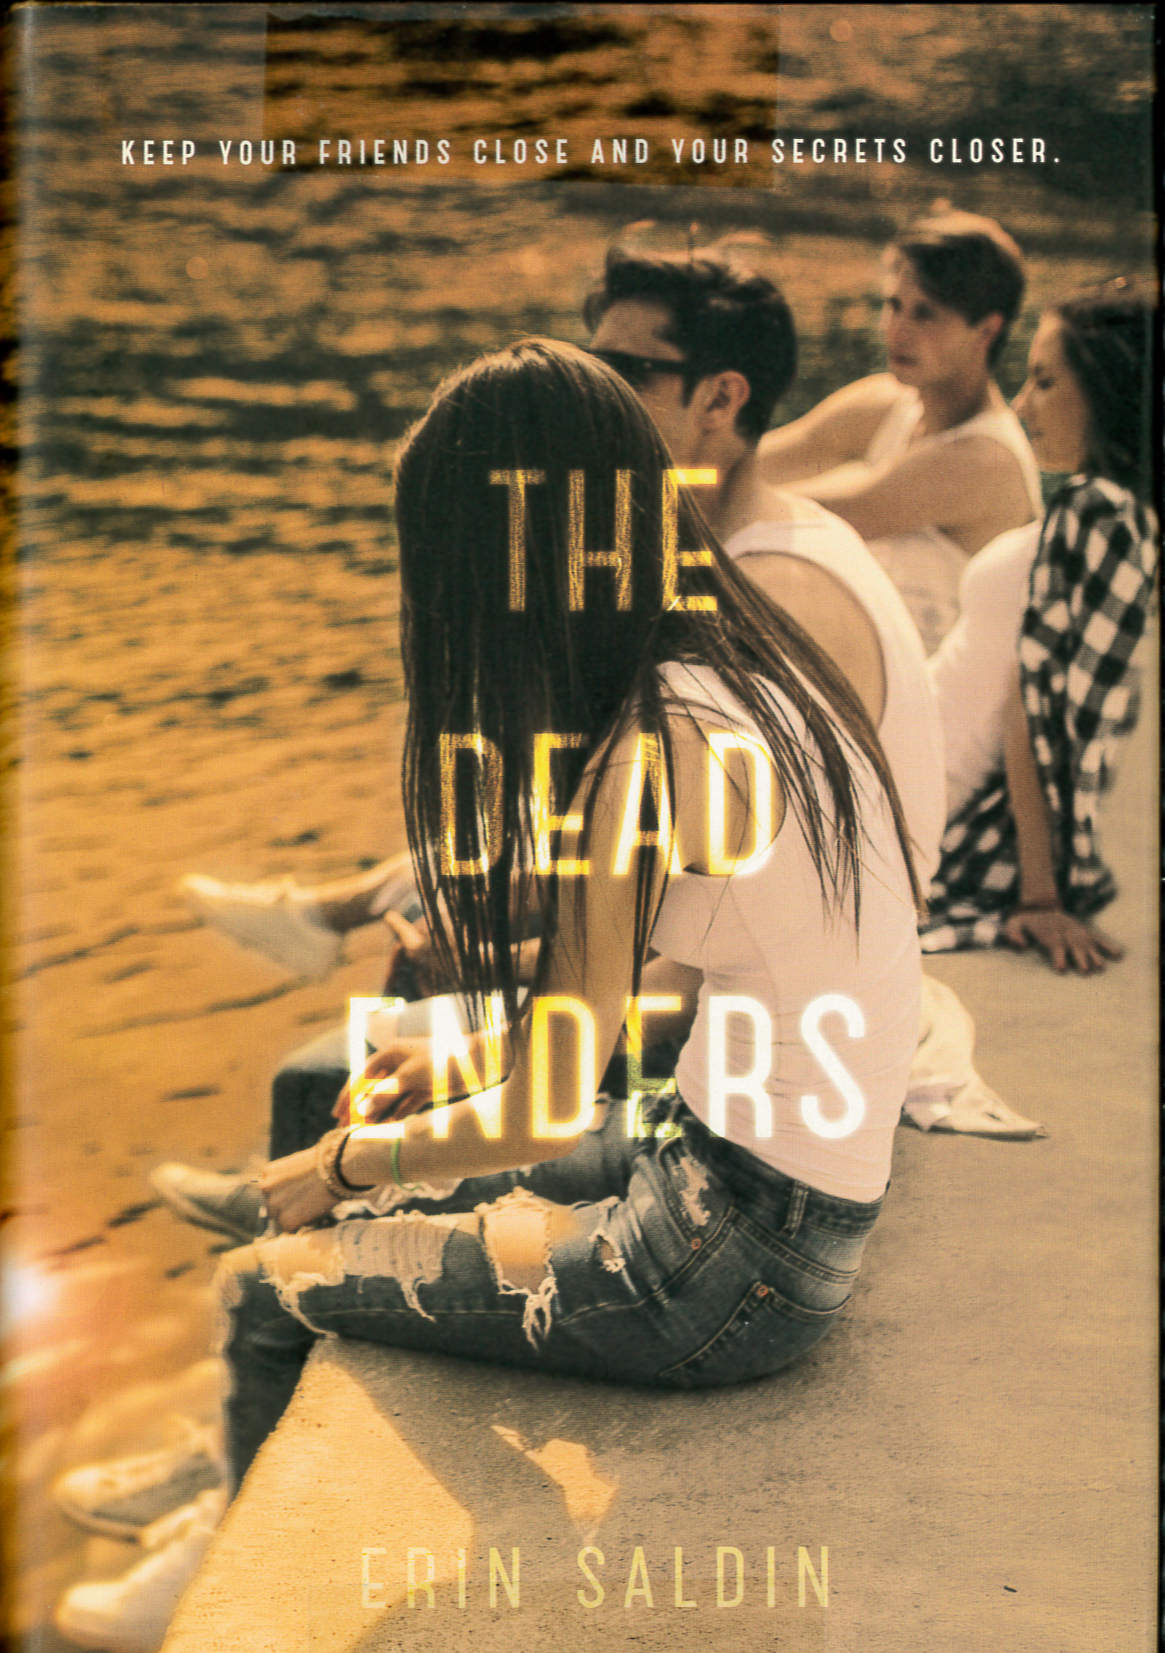 The Dead Enders /